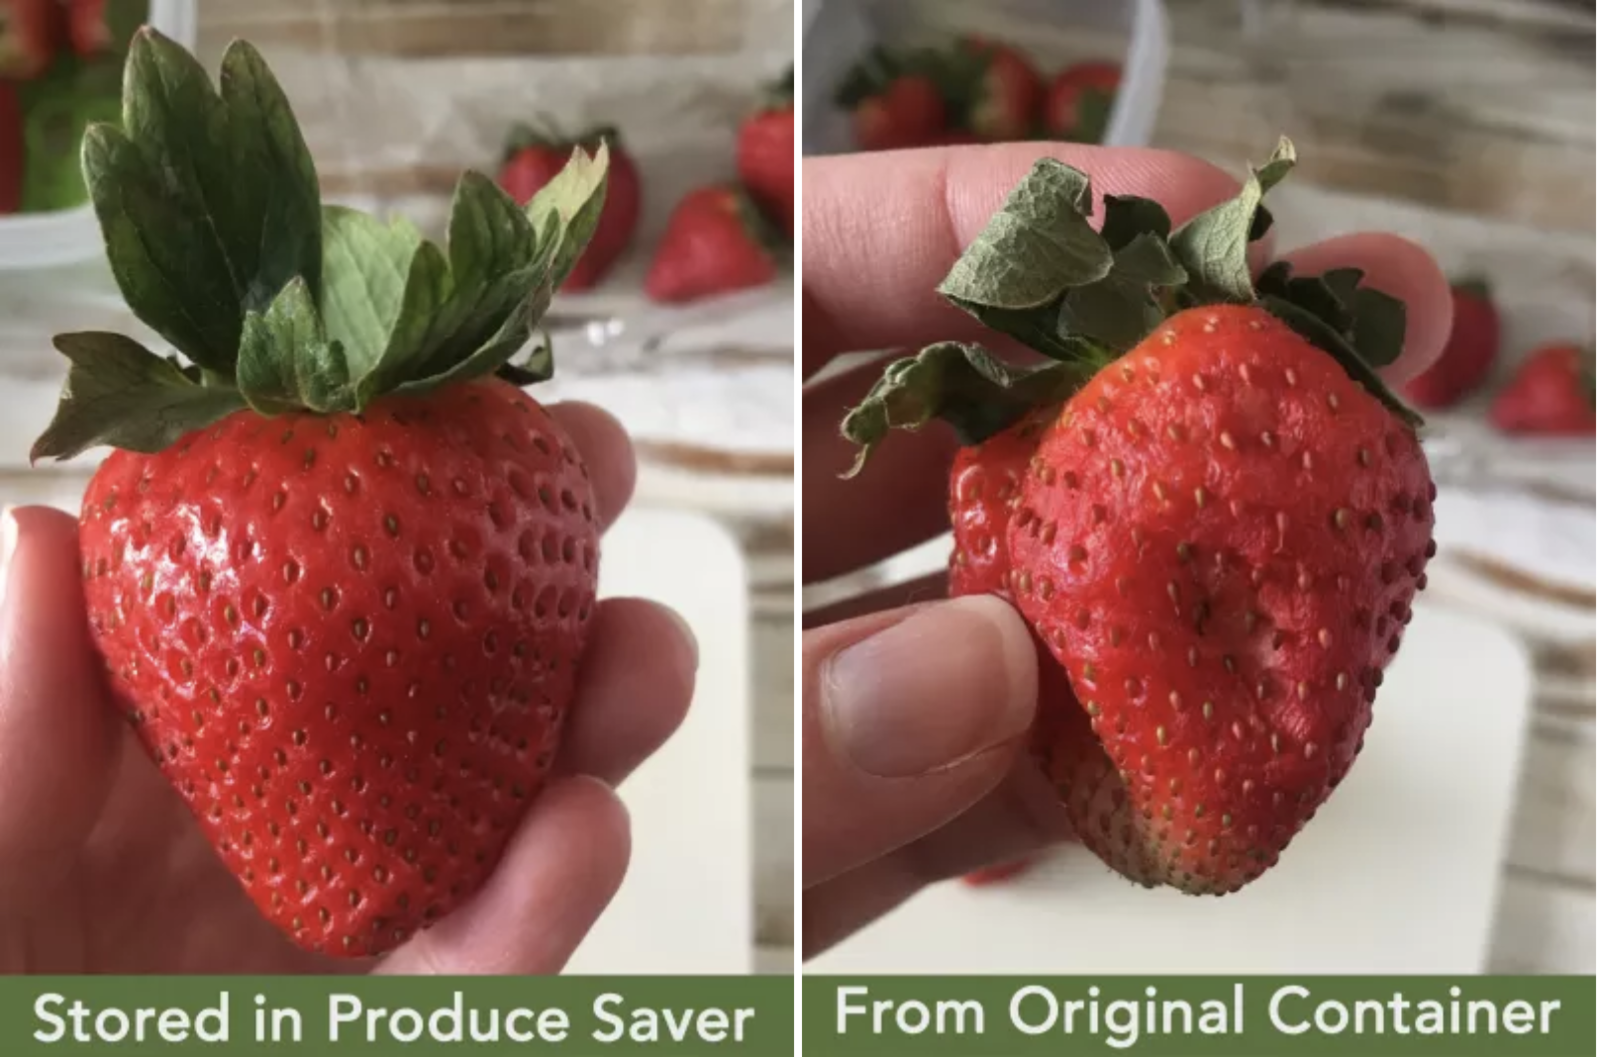 A BuzzFeed Shopping reviewer&#x27;s image comparing a strawberry kept fresh in the Rubbermaid container with one kept in the original clamshell (significantly soft and mushy)